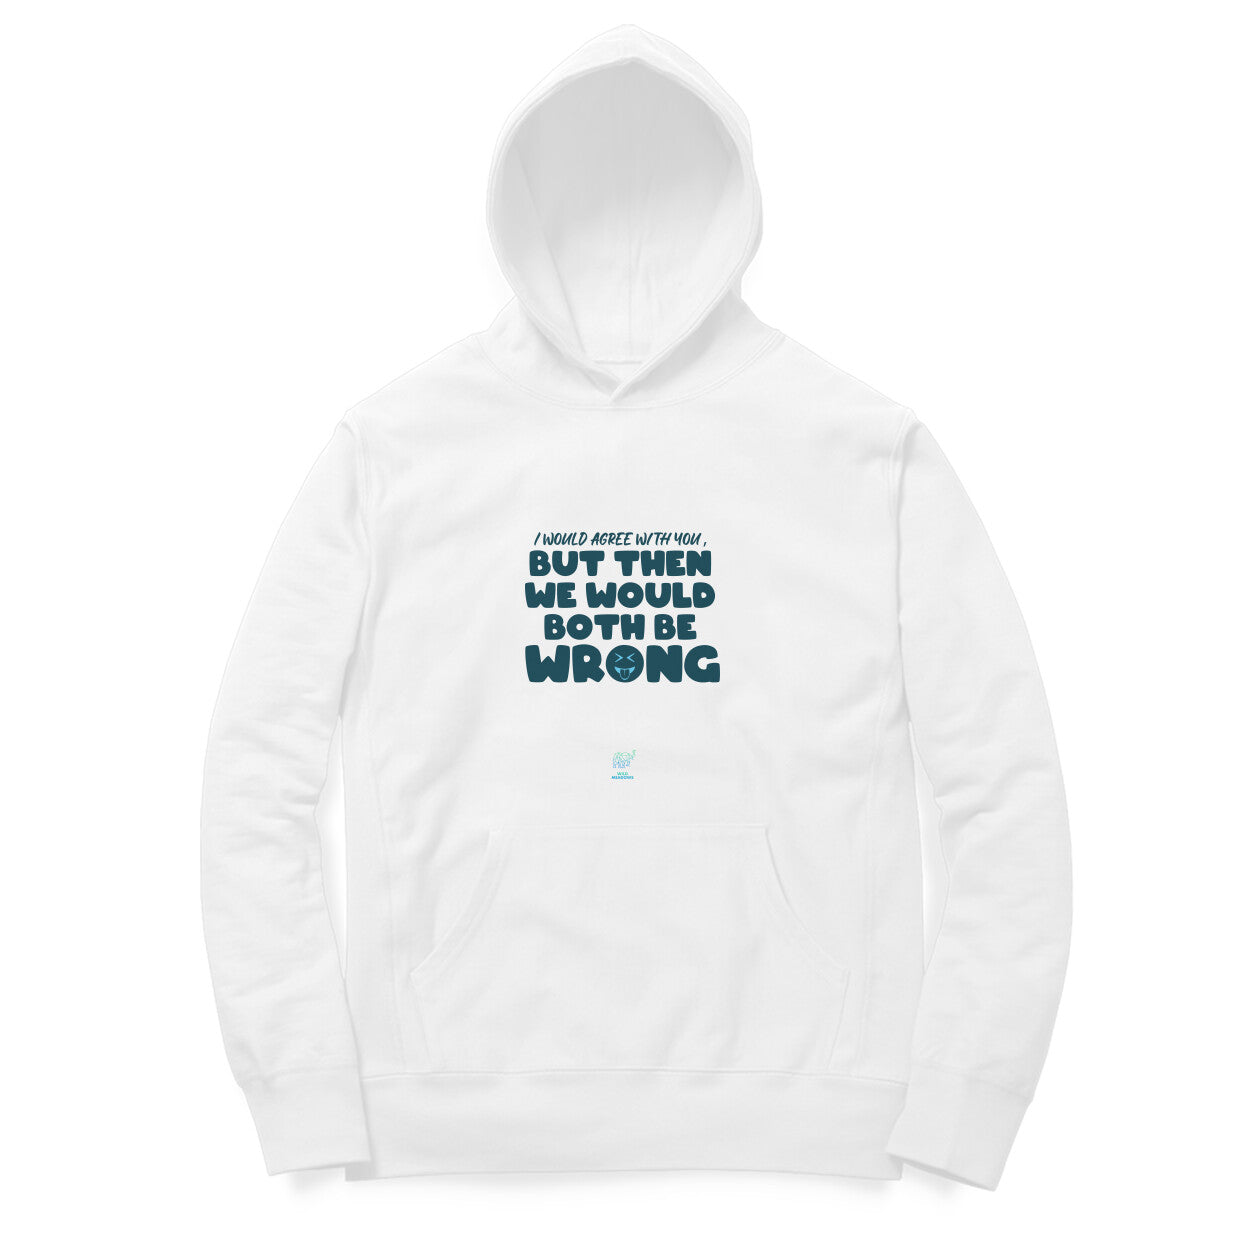 We Both would be wrong - Hoodies - Unisex